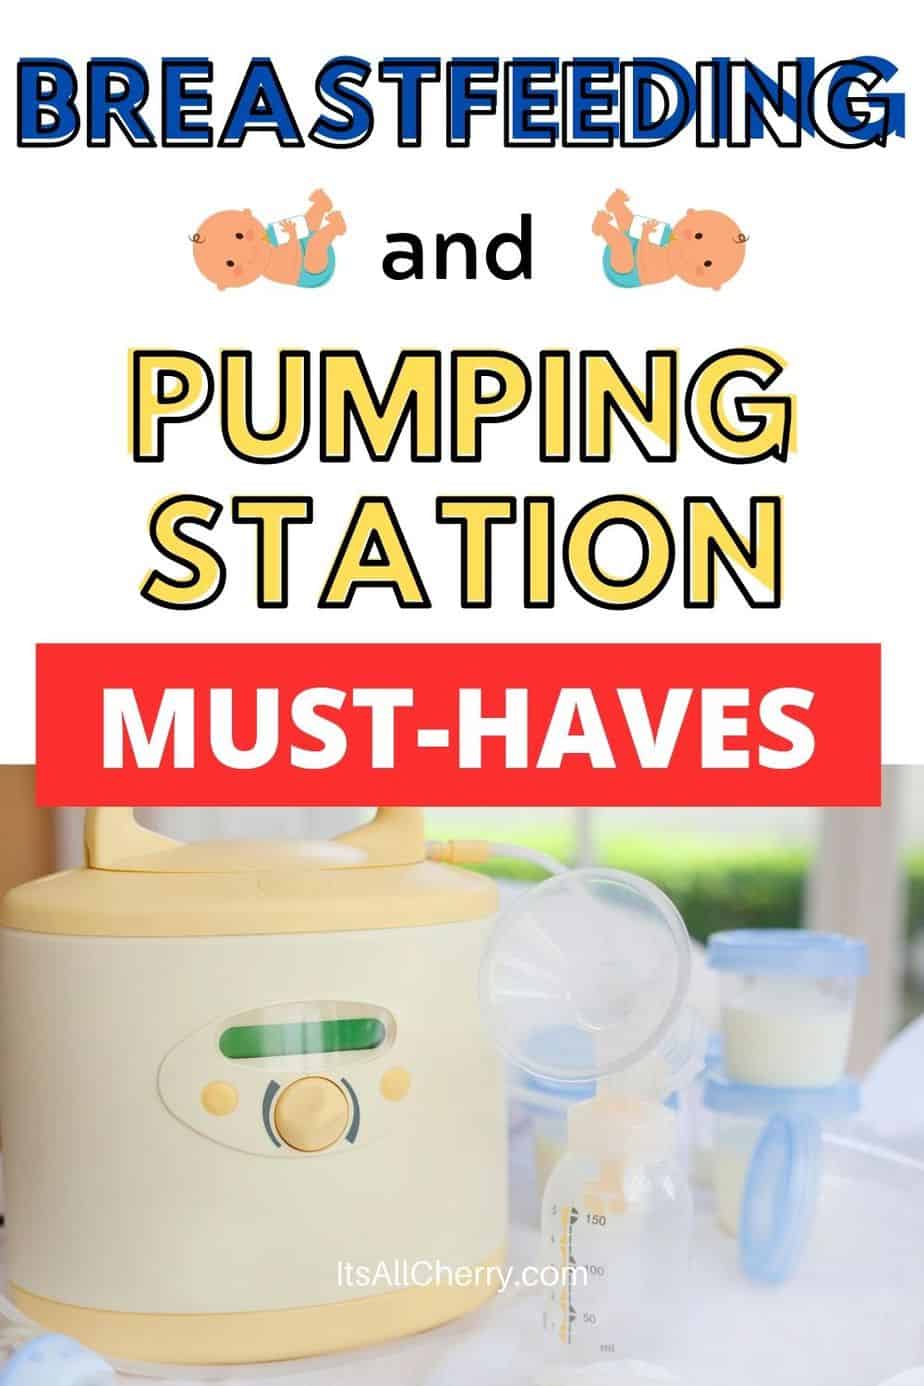 6 Breastfeeding And Pumping Station Must-Haves (for Small Spaces